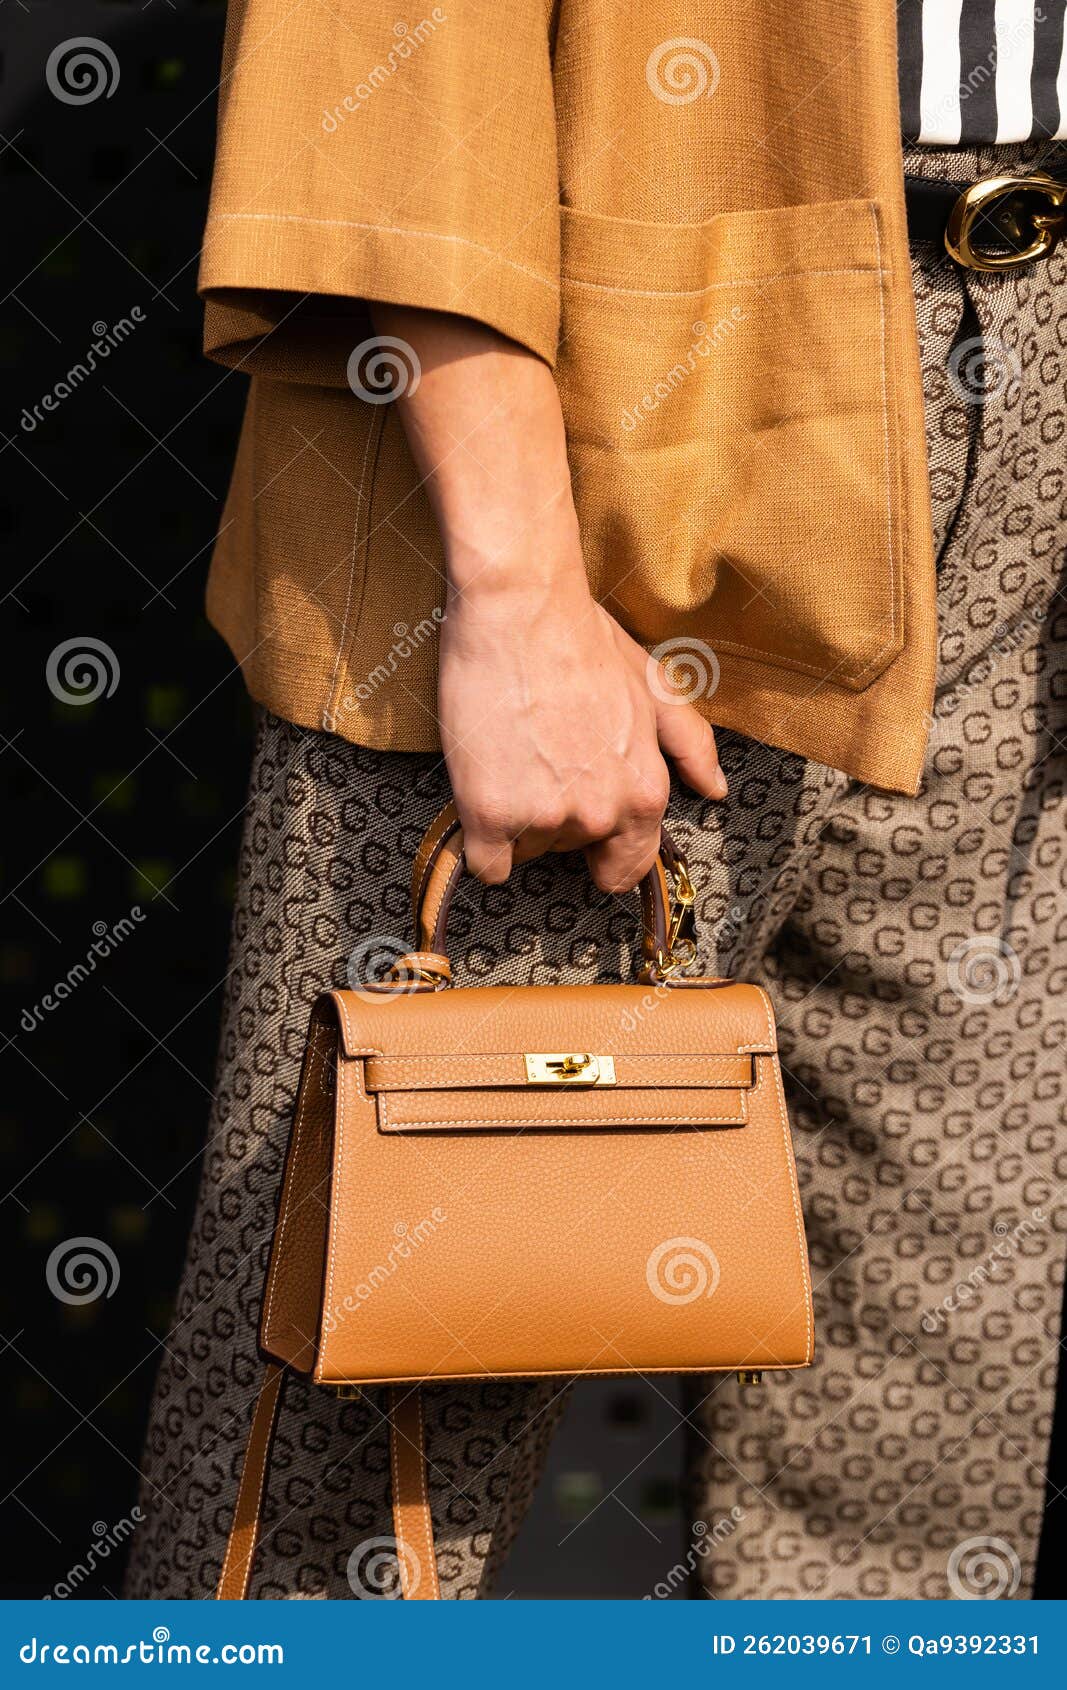 Kelly Bag Stock Photos - Free & Royalty-Free Stock Photos from Dreamstime